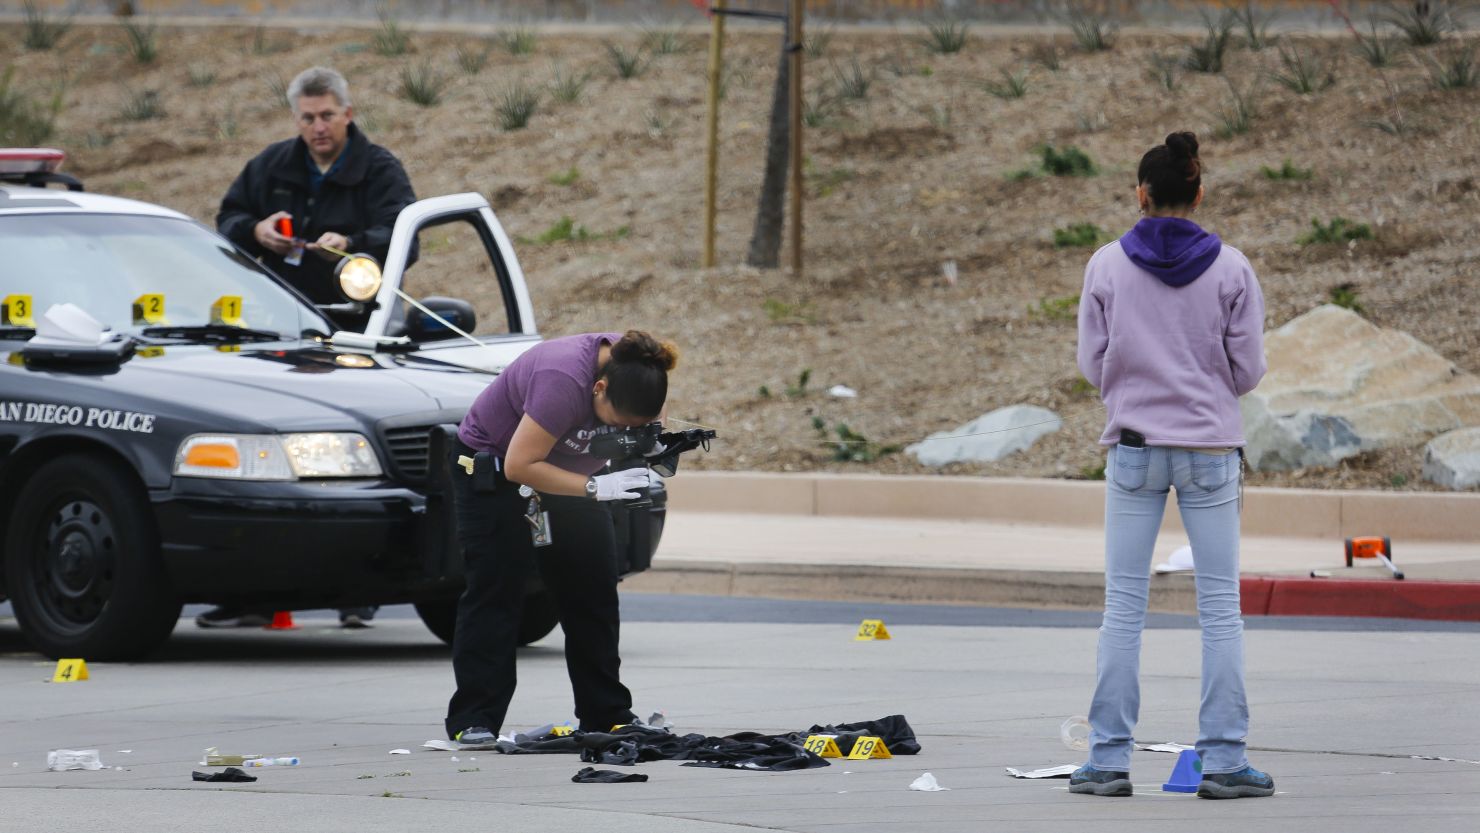 San Diego Police Department officers collect evidence at the scene of a fatal officer-involved shooting of a 15-year-old boy. 